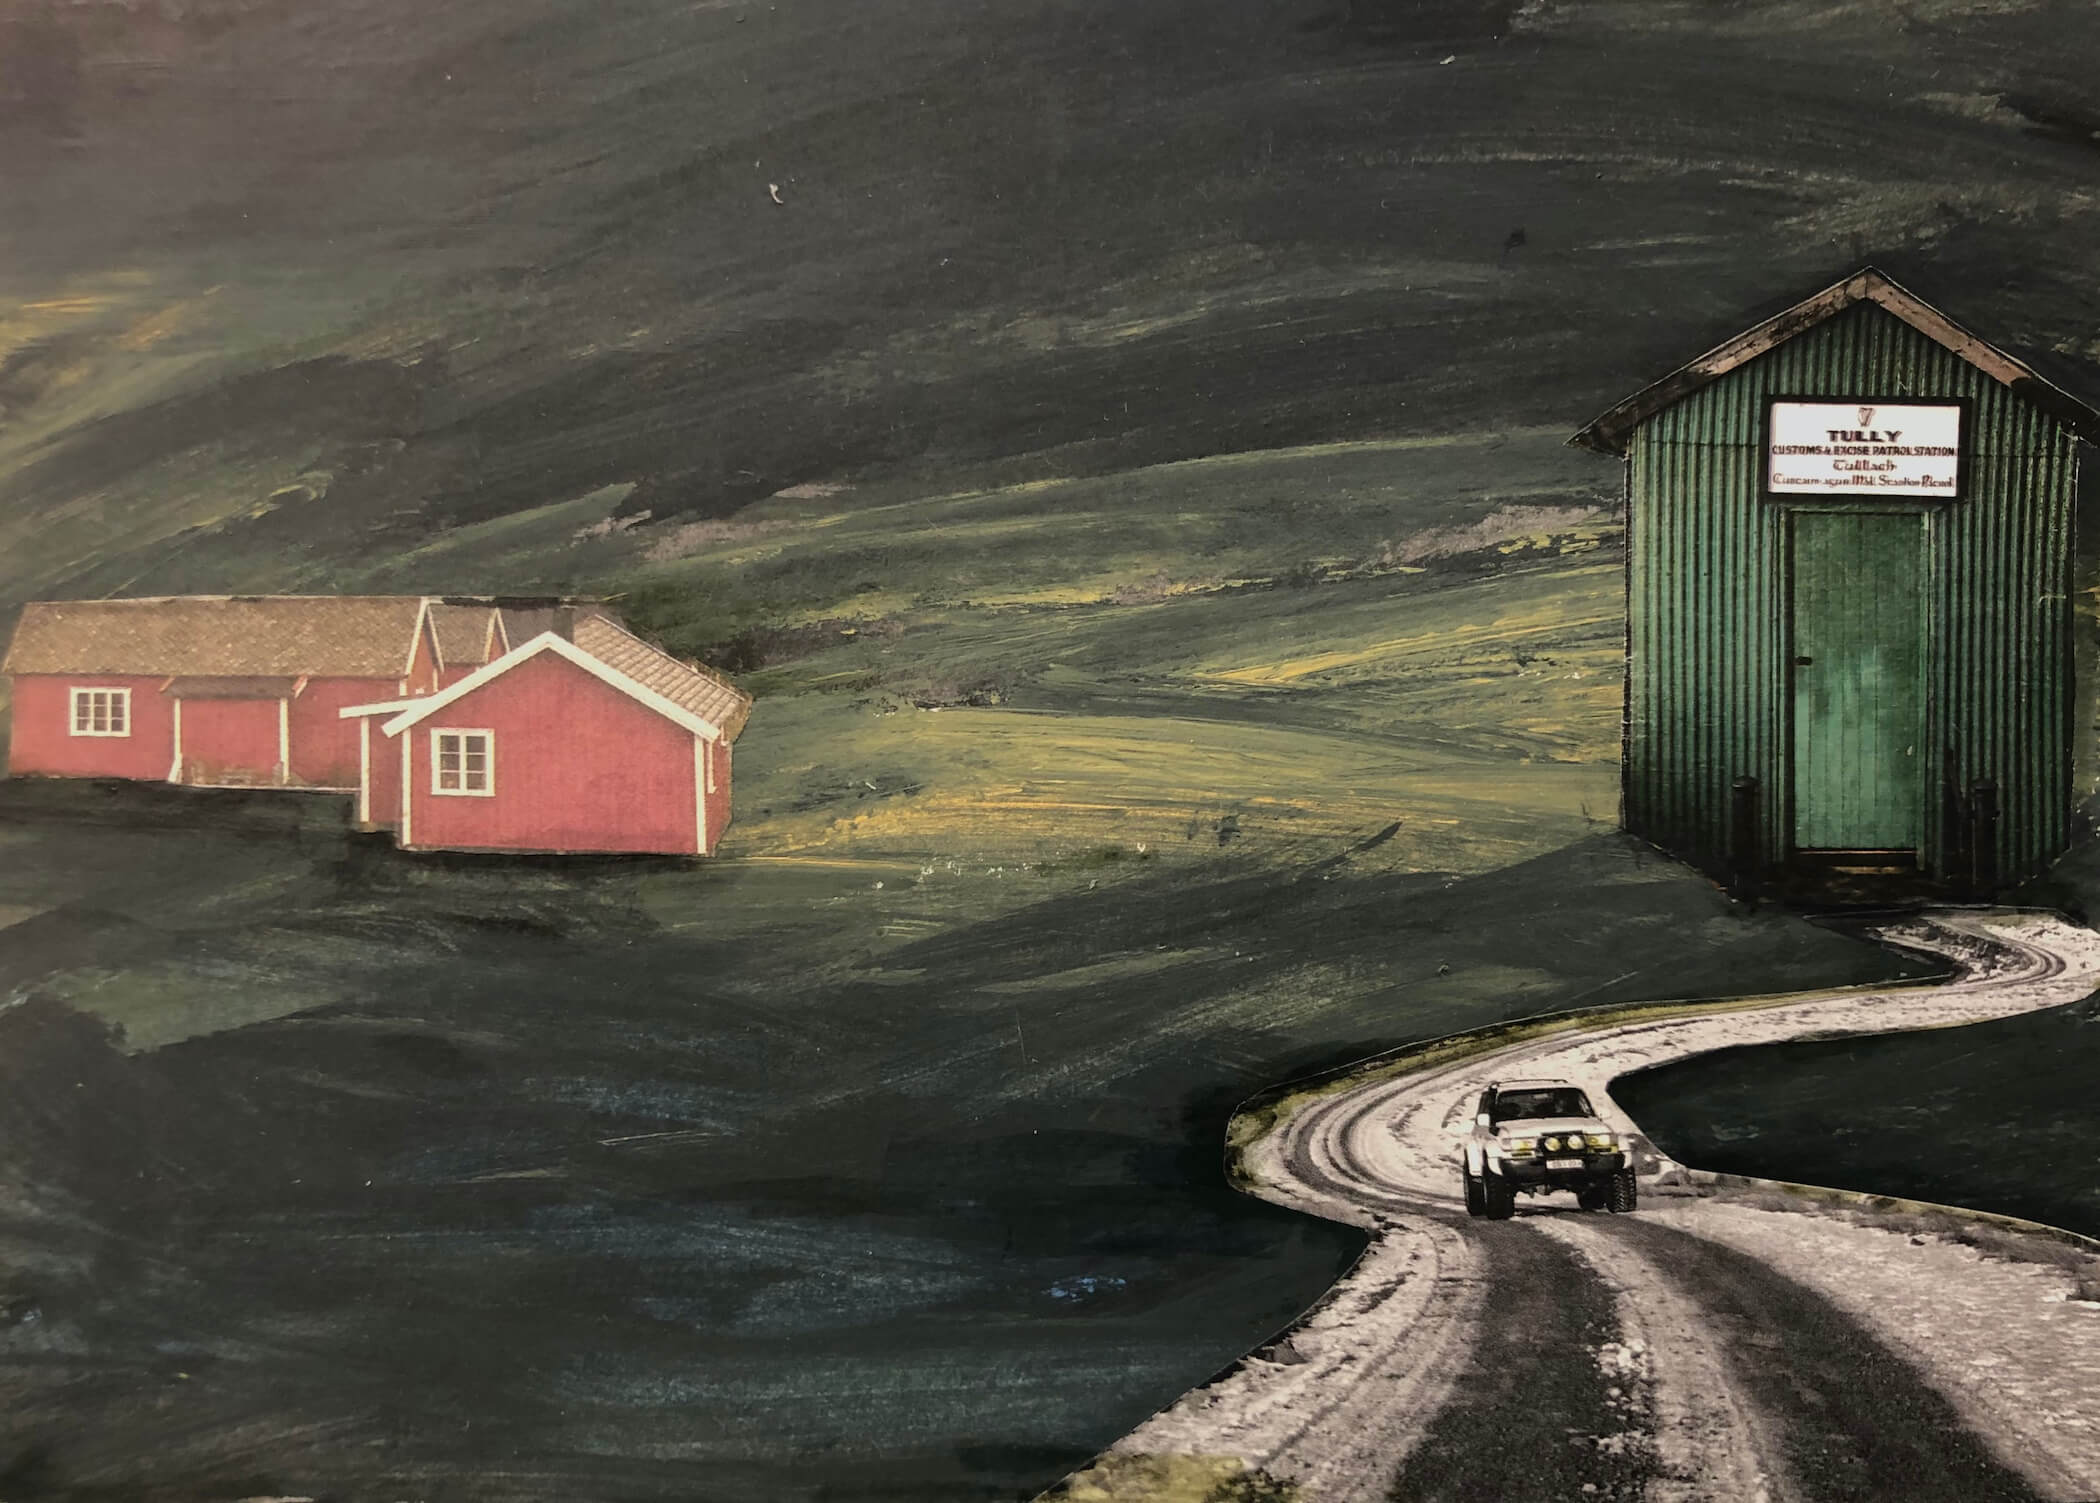 On the road again, 2021, Mixed media on paper, 15x21